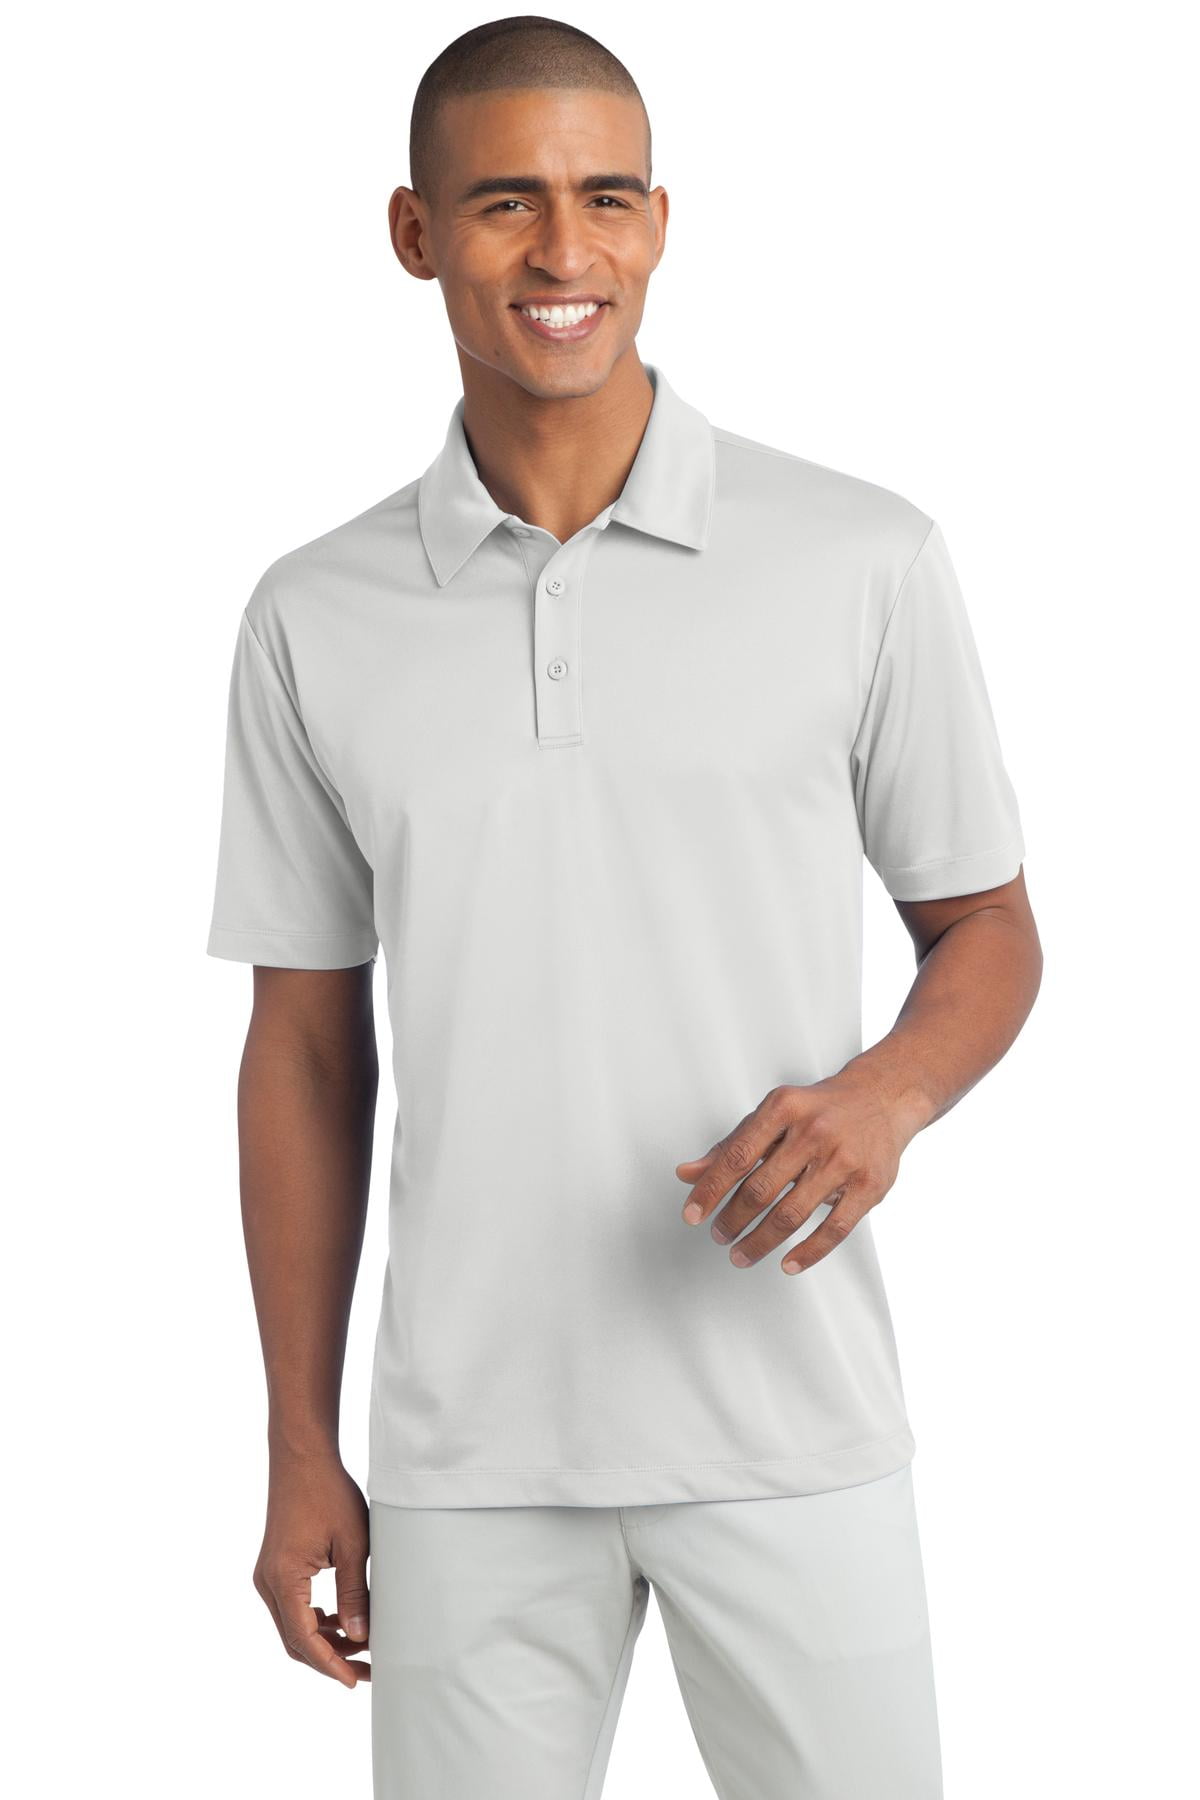 L540 Port Authority Performance Polo